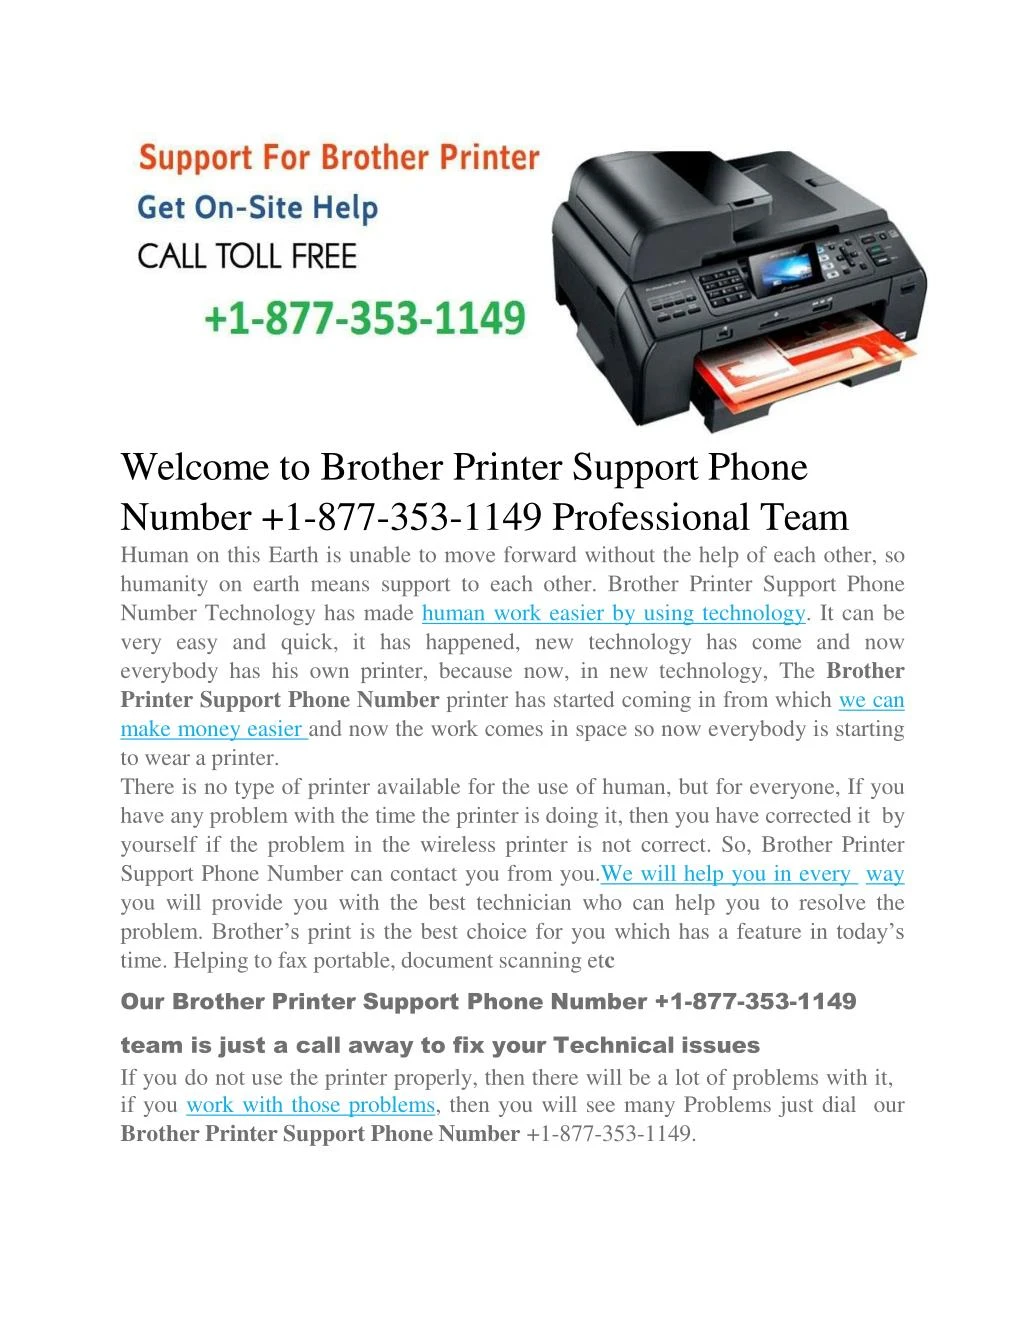 welcome to brother printer support phone number 1 877 353 1149 professional team